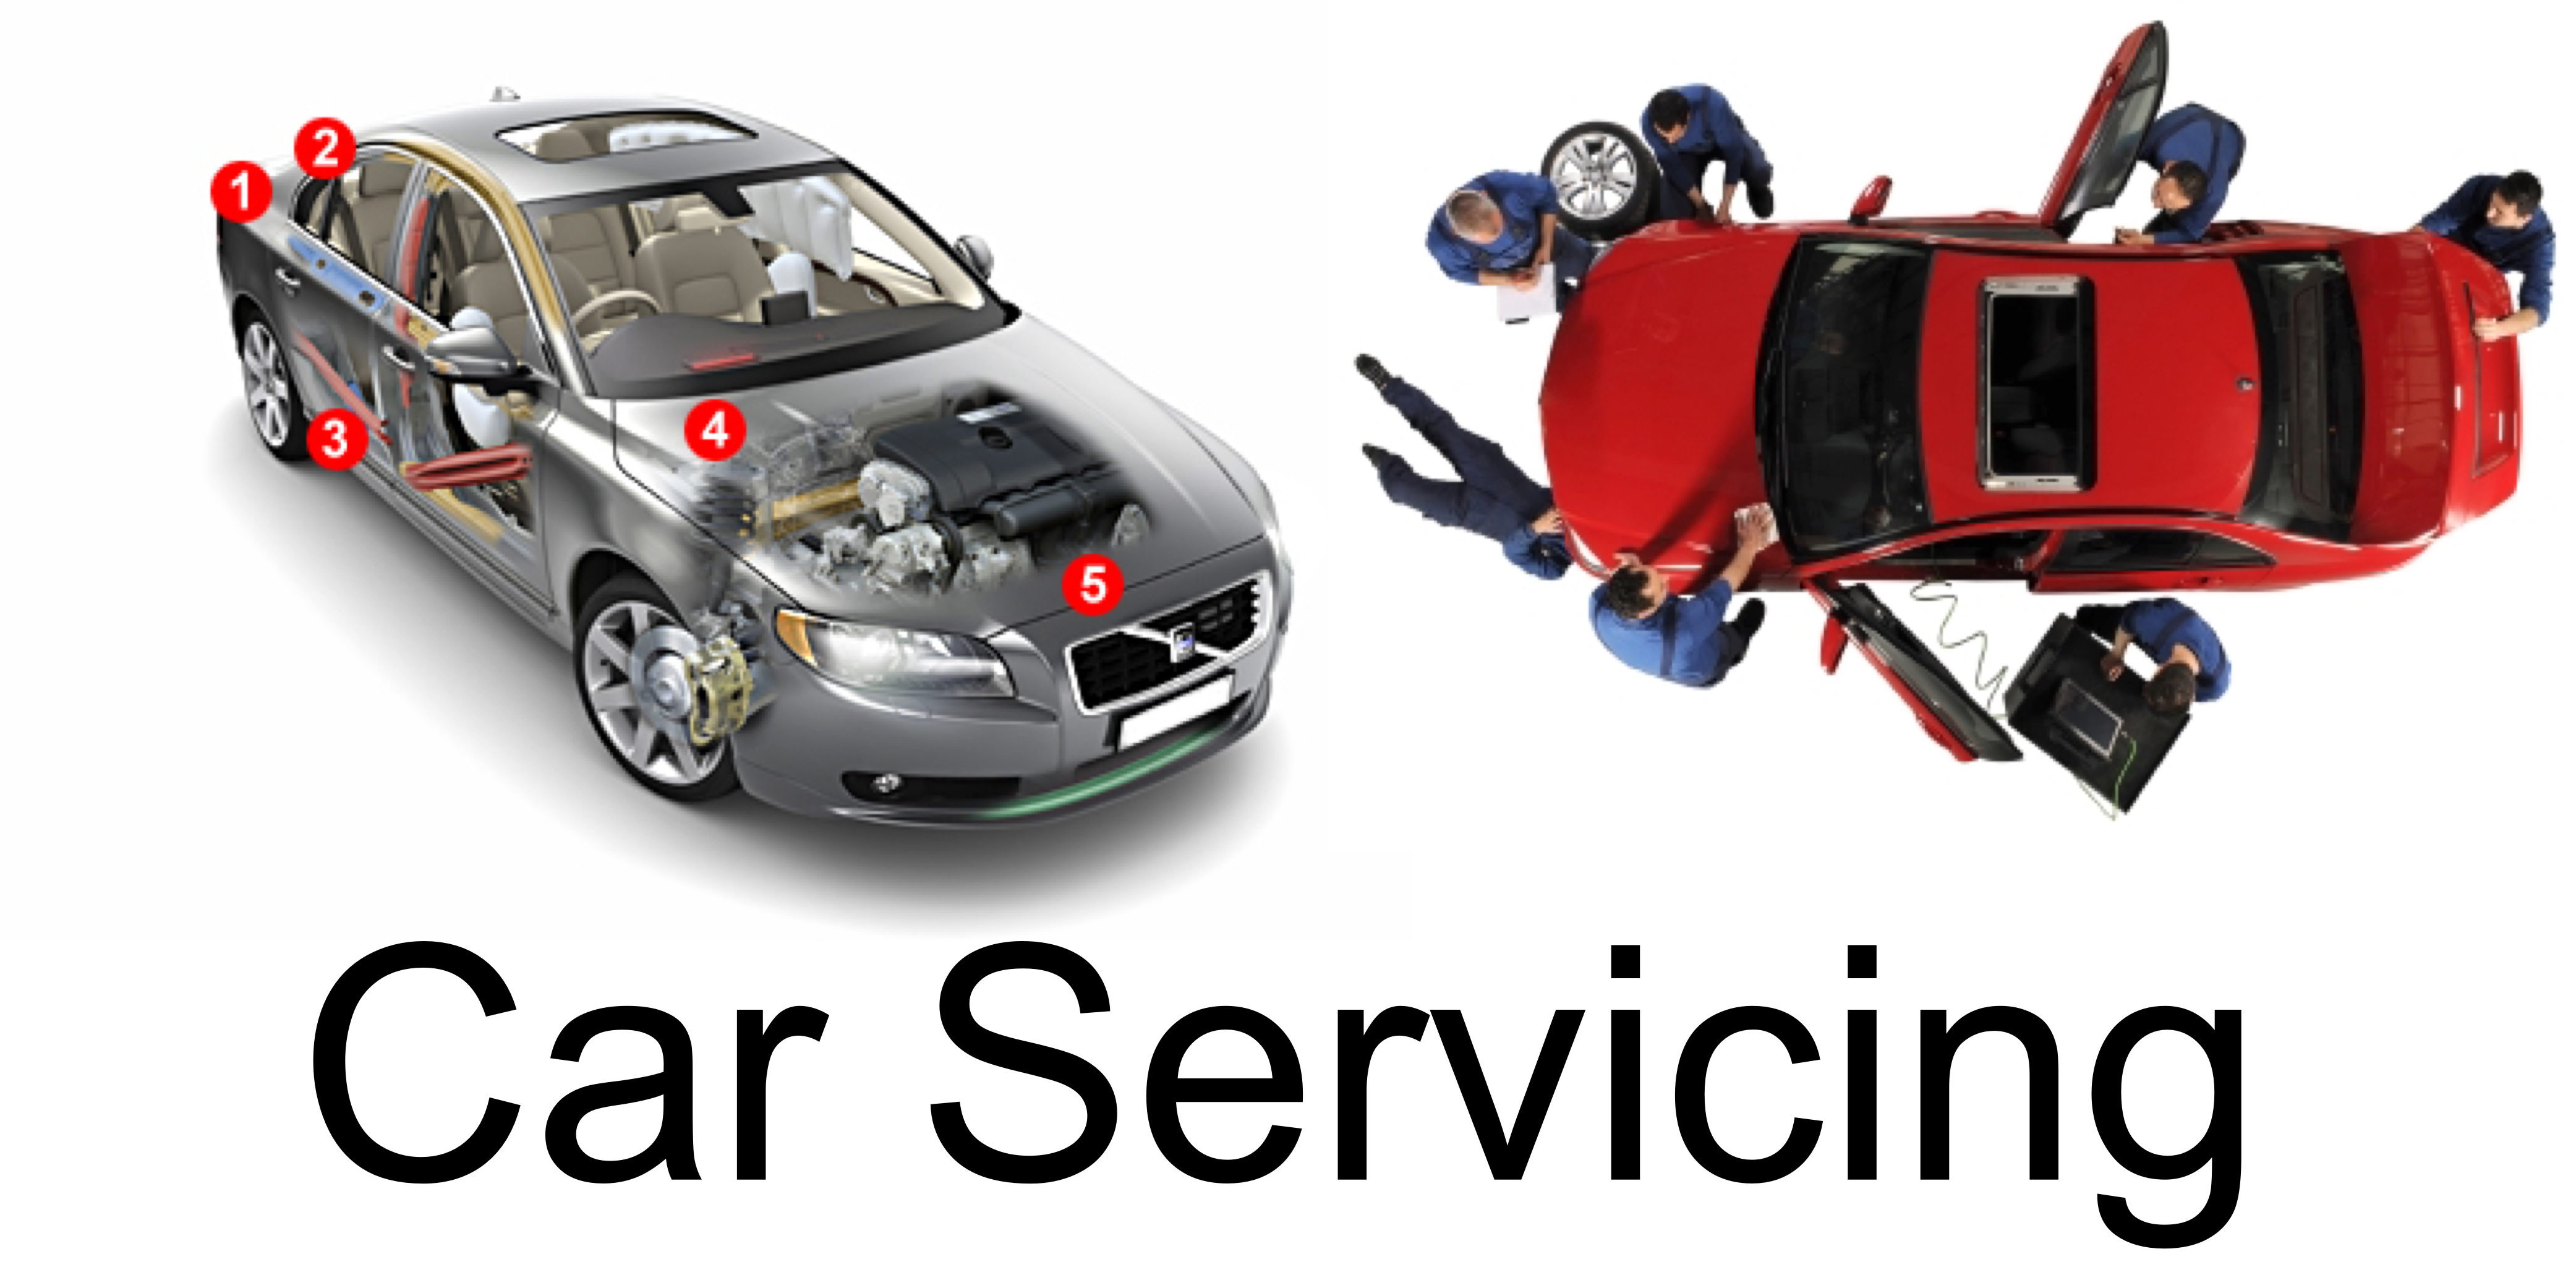 EAST COAST TYRES SOUTH QUEENSFERRY OFFER CAR SERVICING